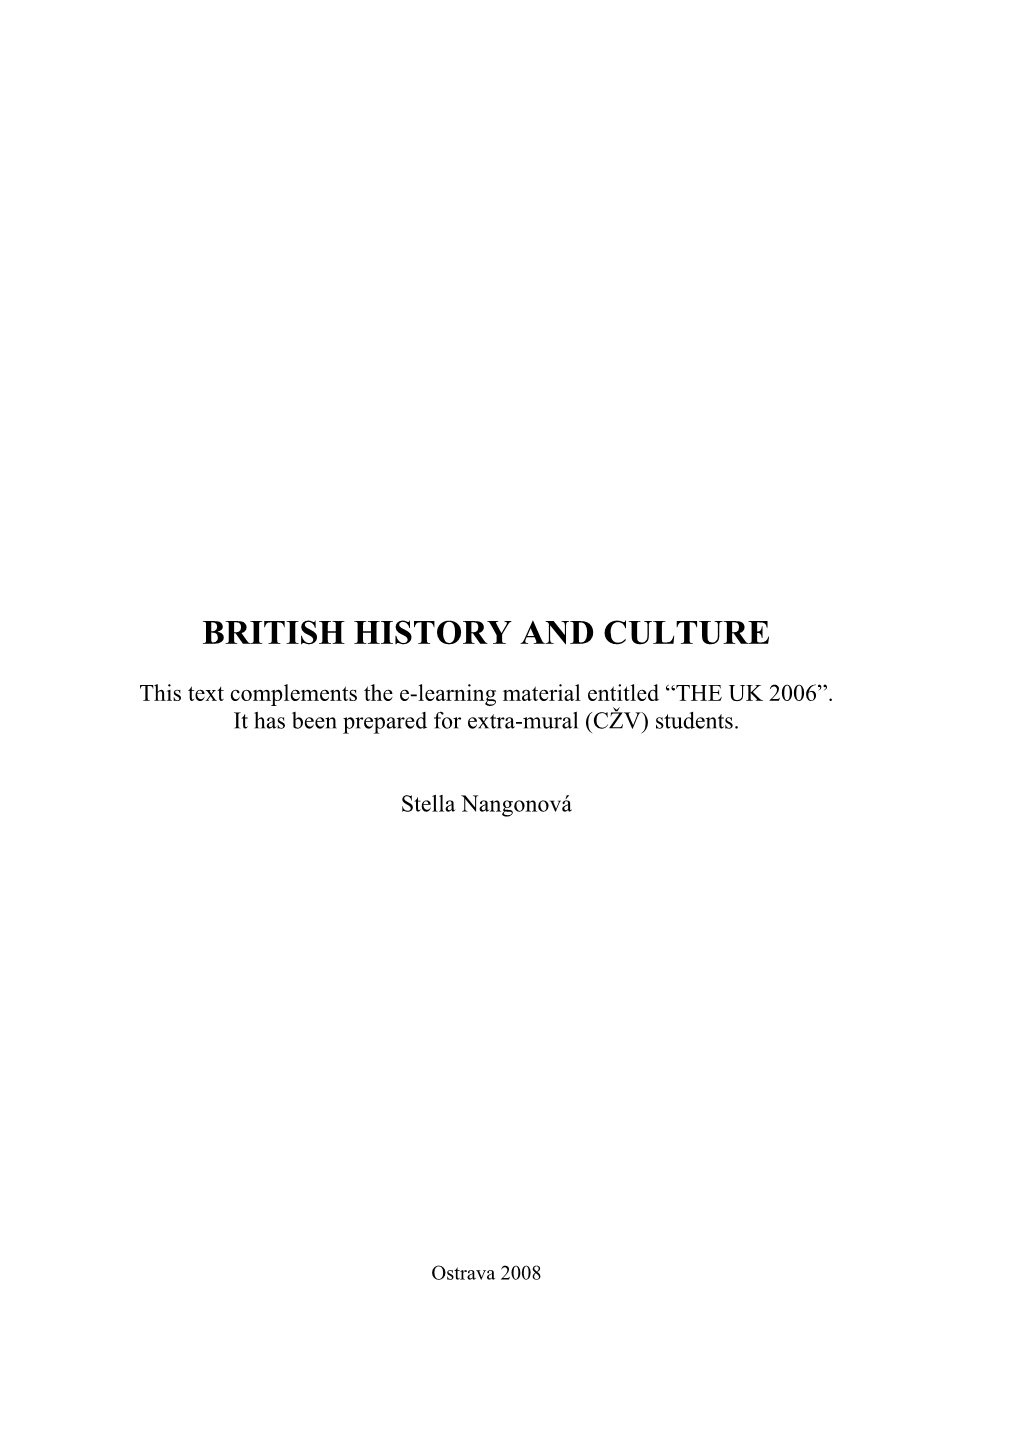 British History and Culture